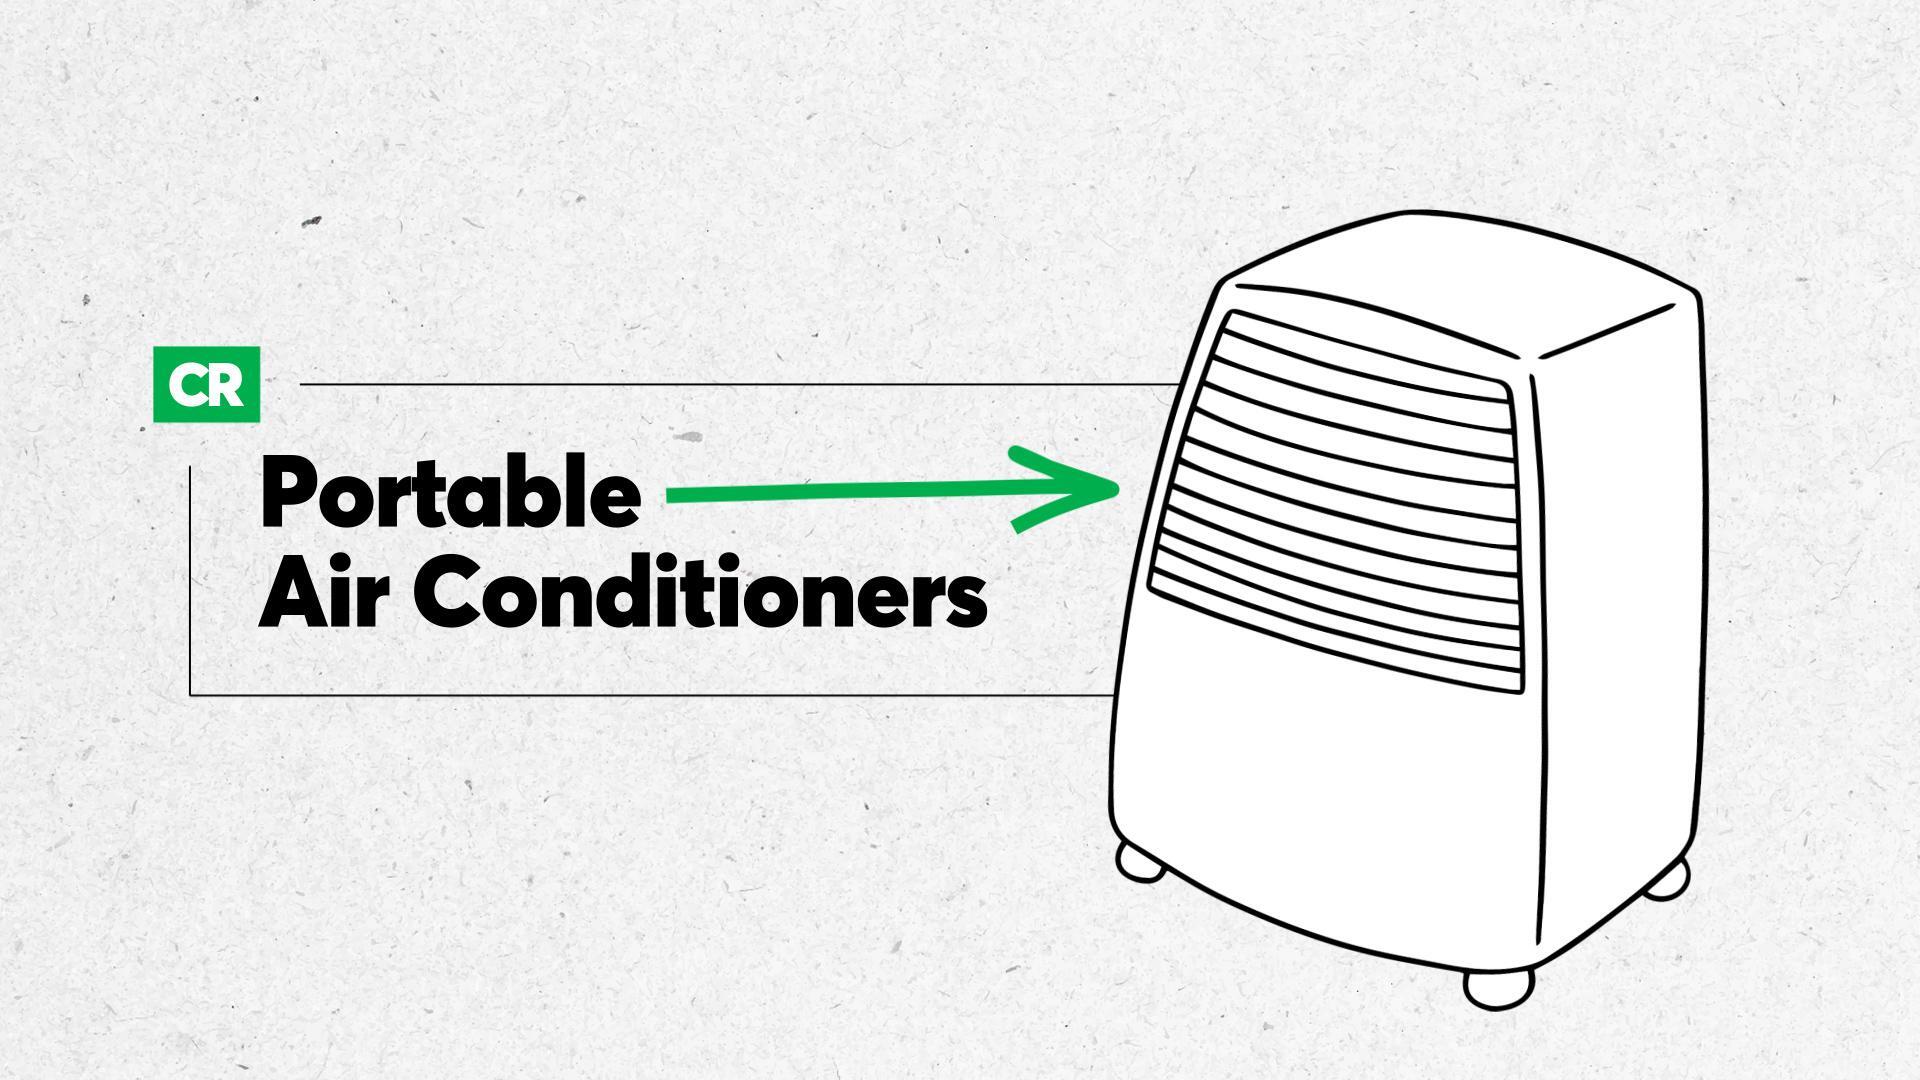 Black & Decker 14000 BTU Portable Air Conditioner (BPP10WTB) vs LG 6000 BTU  Portable Air Conditioner (LP0621WSR): What is the difference?